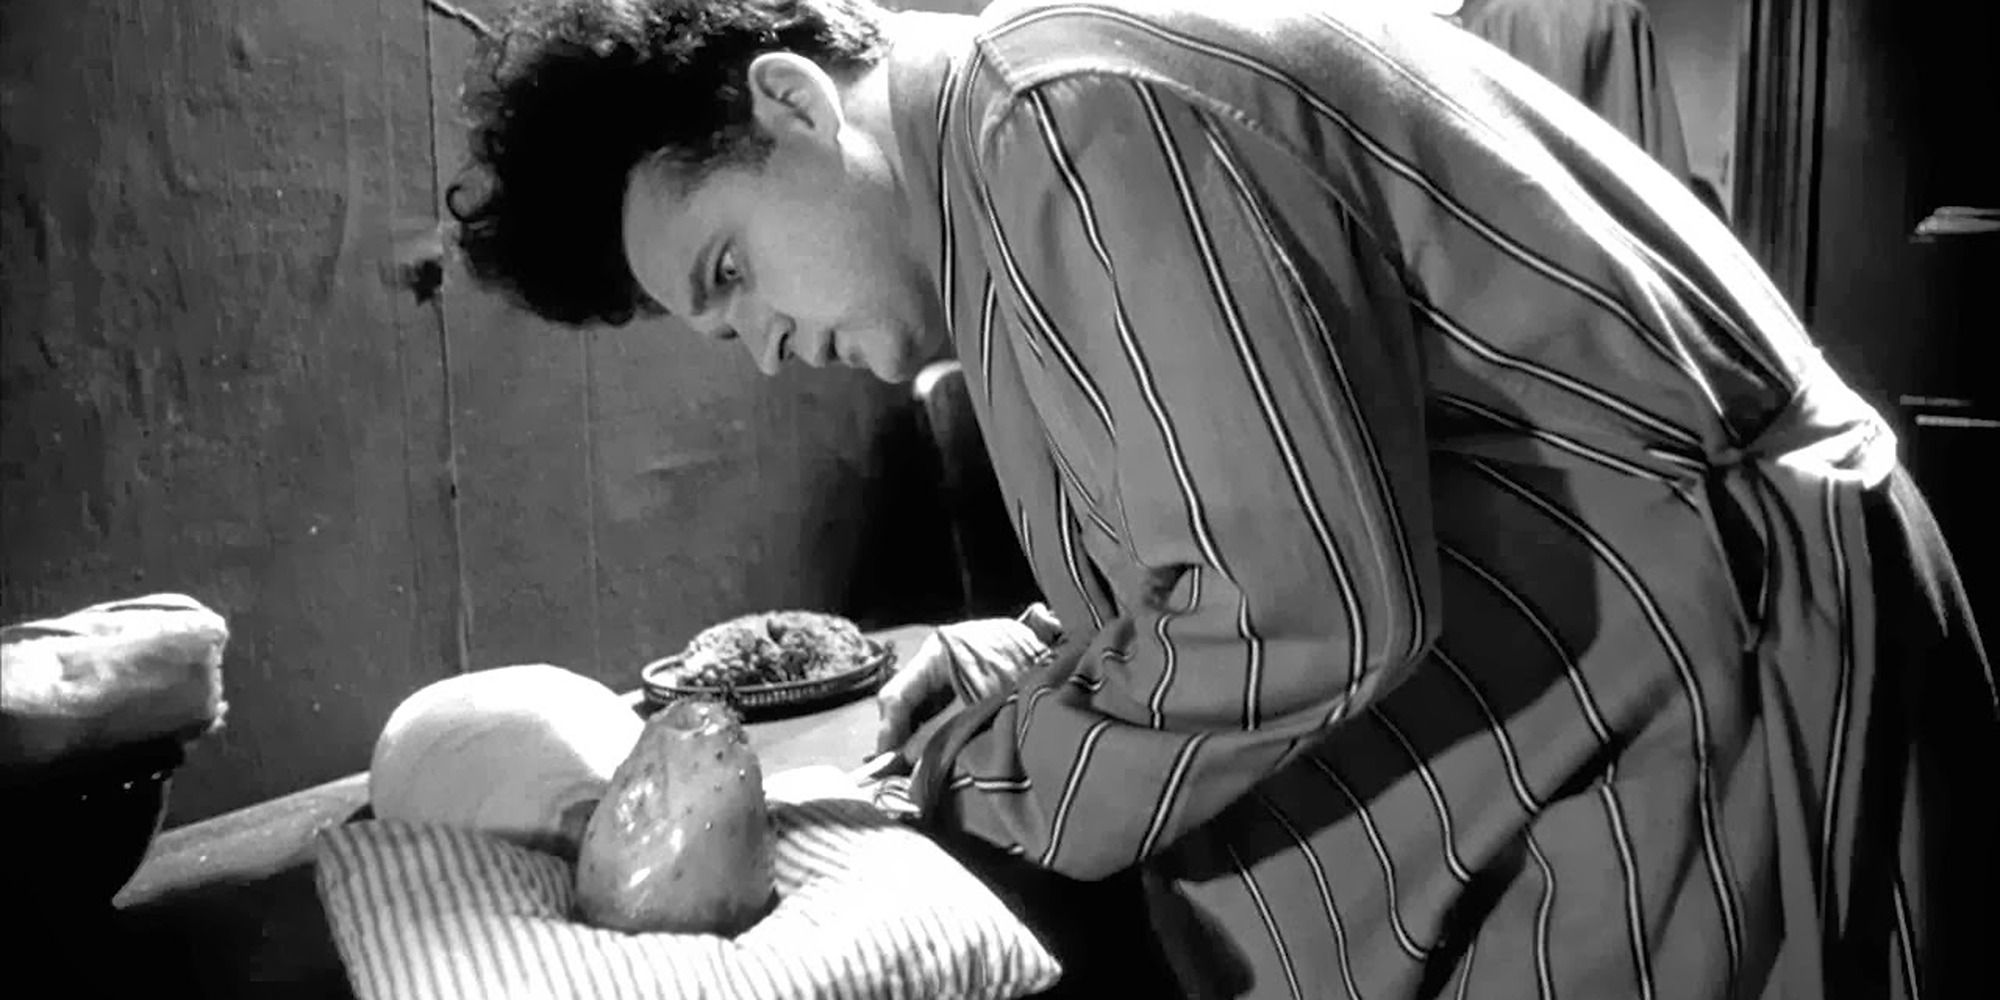 Henry and his deformed mutant baby from Eraserhead